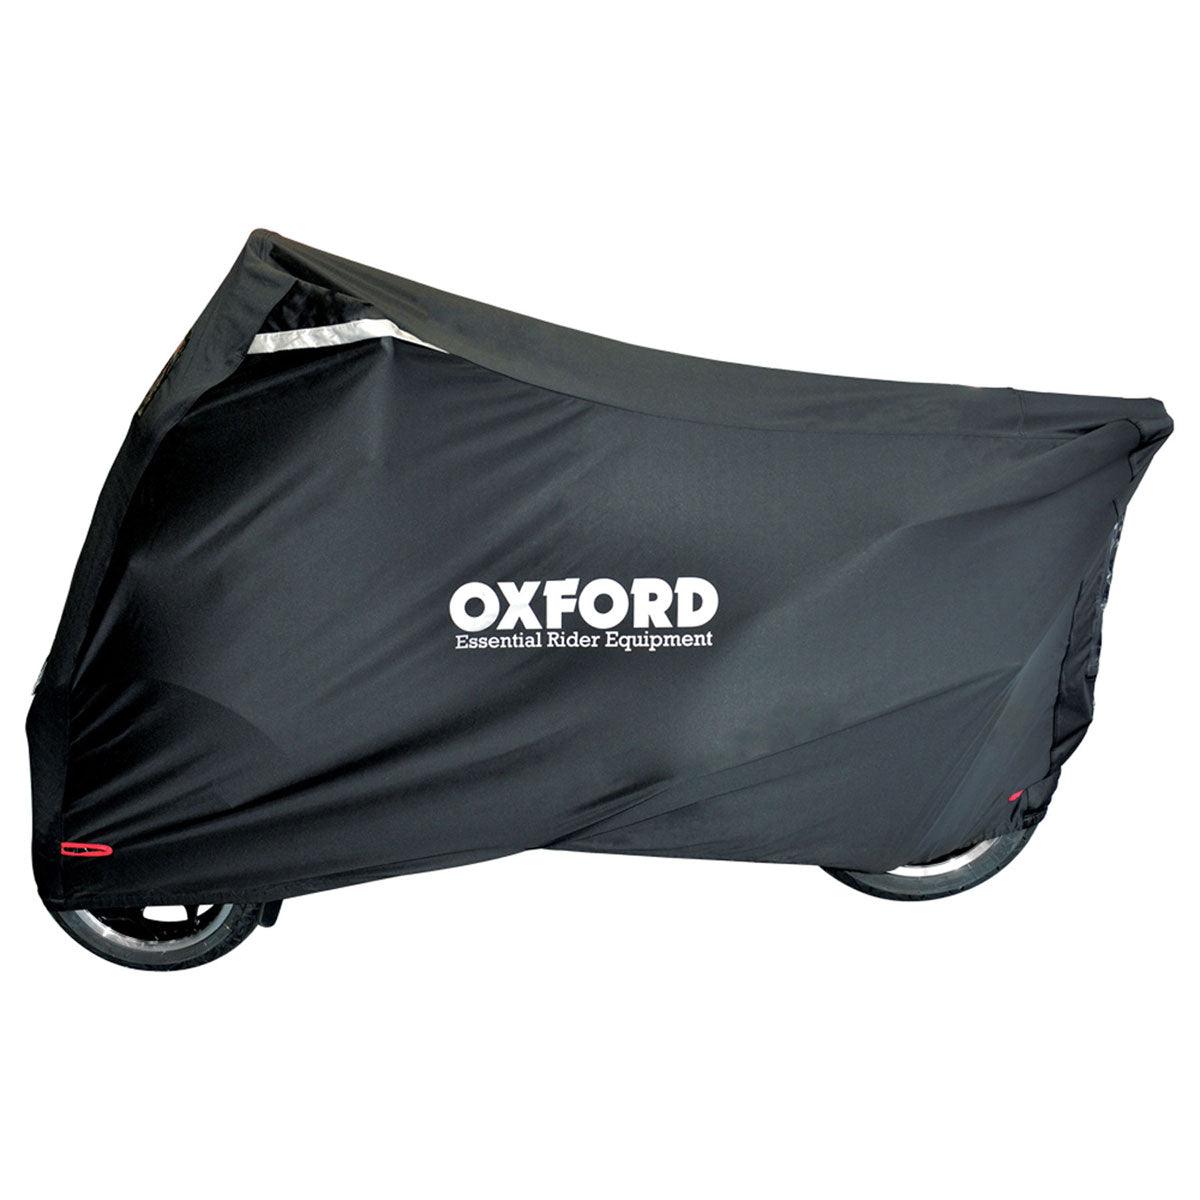 Oxford Protex Stretch Motorcycle Cover for Three Wheel Bikes - Black - Vehicle Covers